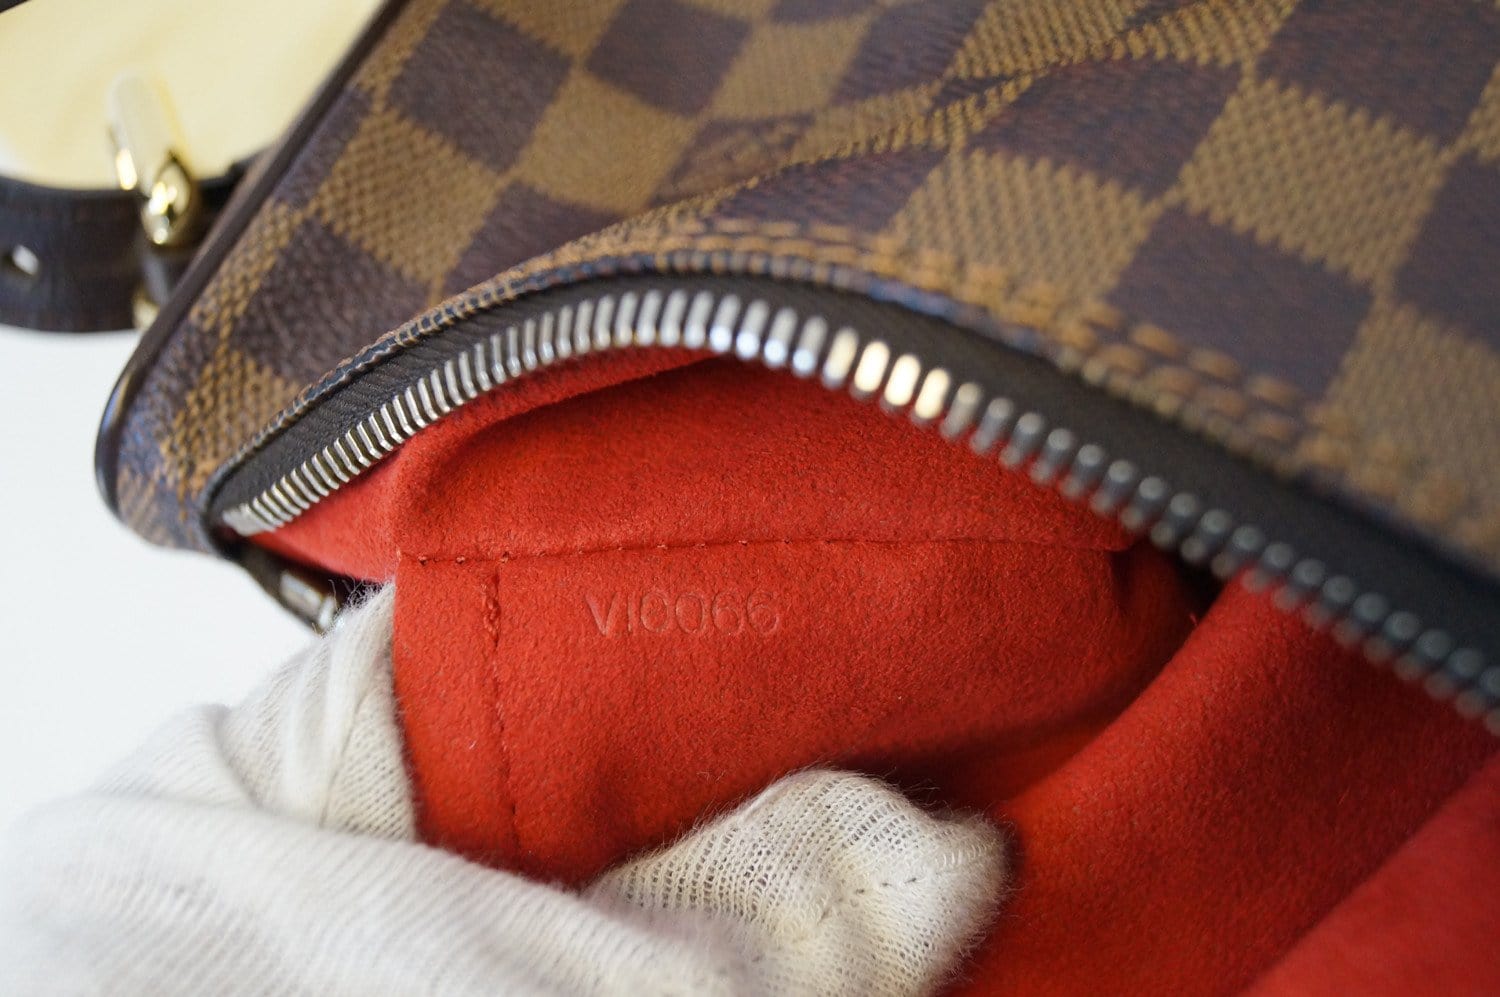 LOUIS VUITTON LOUIS VUITTON Ravello GM Shoulder hand Bag N60006 Damier  Ebene Used N60006｜Product Code：2101217427968｜BRAND OFF Online Store